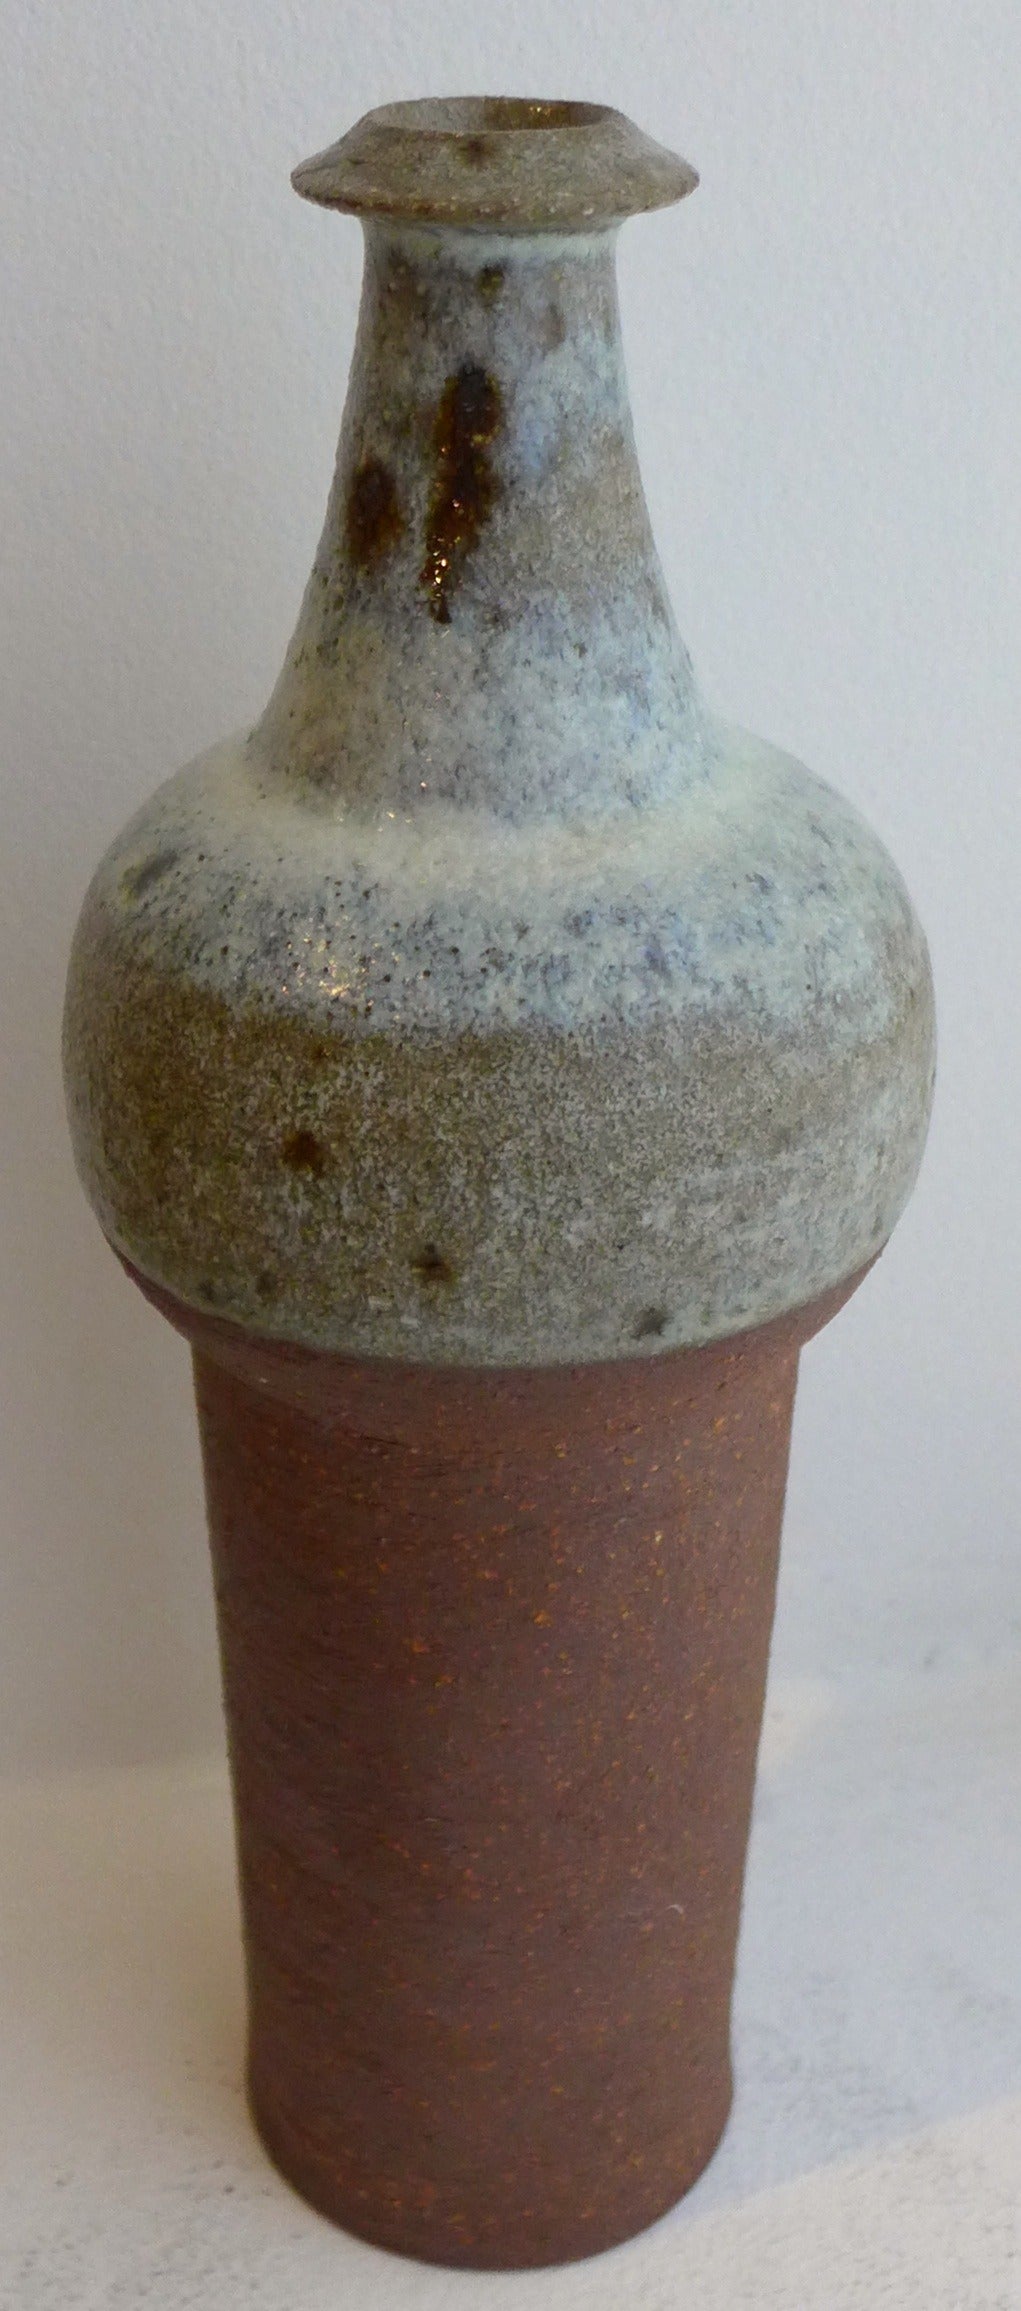 Studio vase with bulbous center and flaring neck, circa 1960s. Multi-chromatic glaze on top, unglazed on bottom. By Danish painter, ceramist, and glass-maker Finn Lynggaard (1930-2011) Lynggaard studied painting and ceramics at the Royal College of